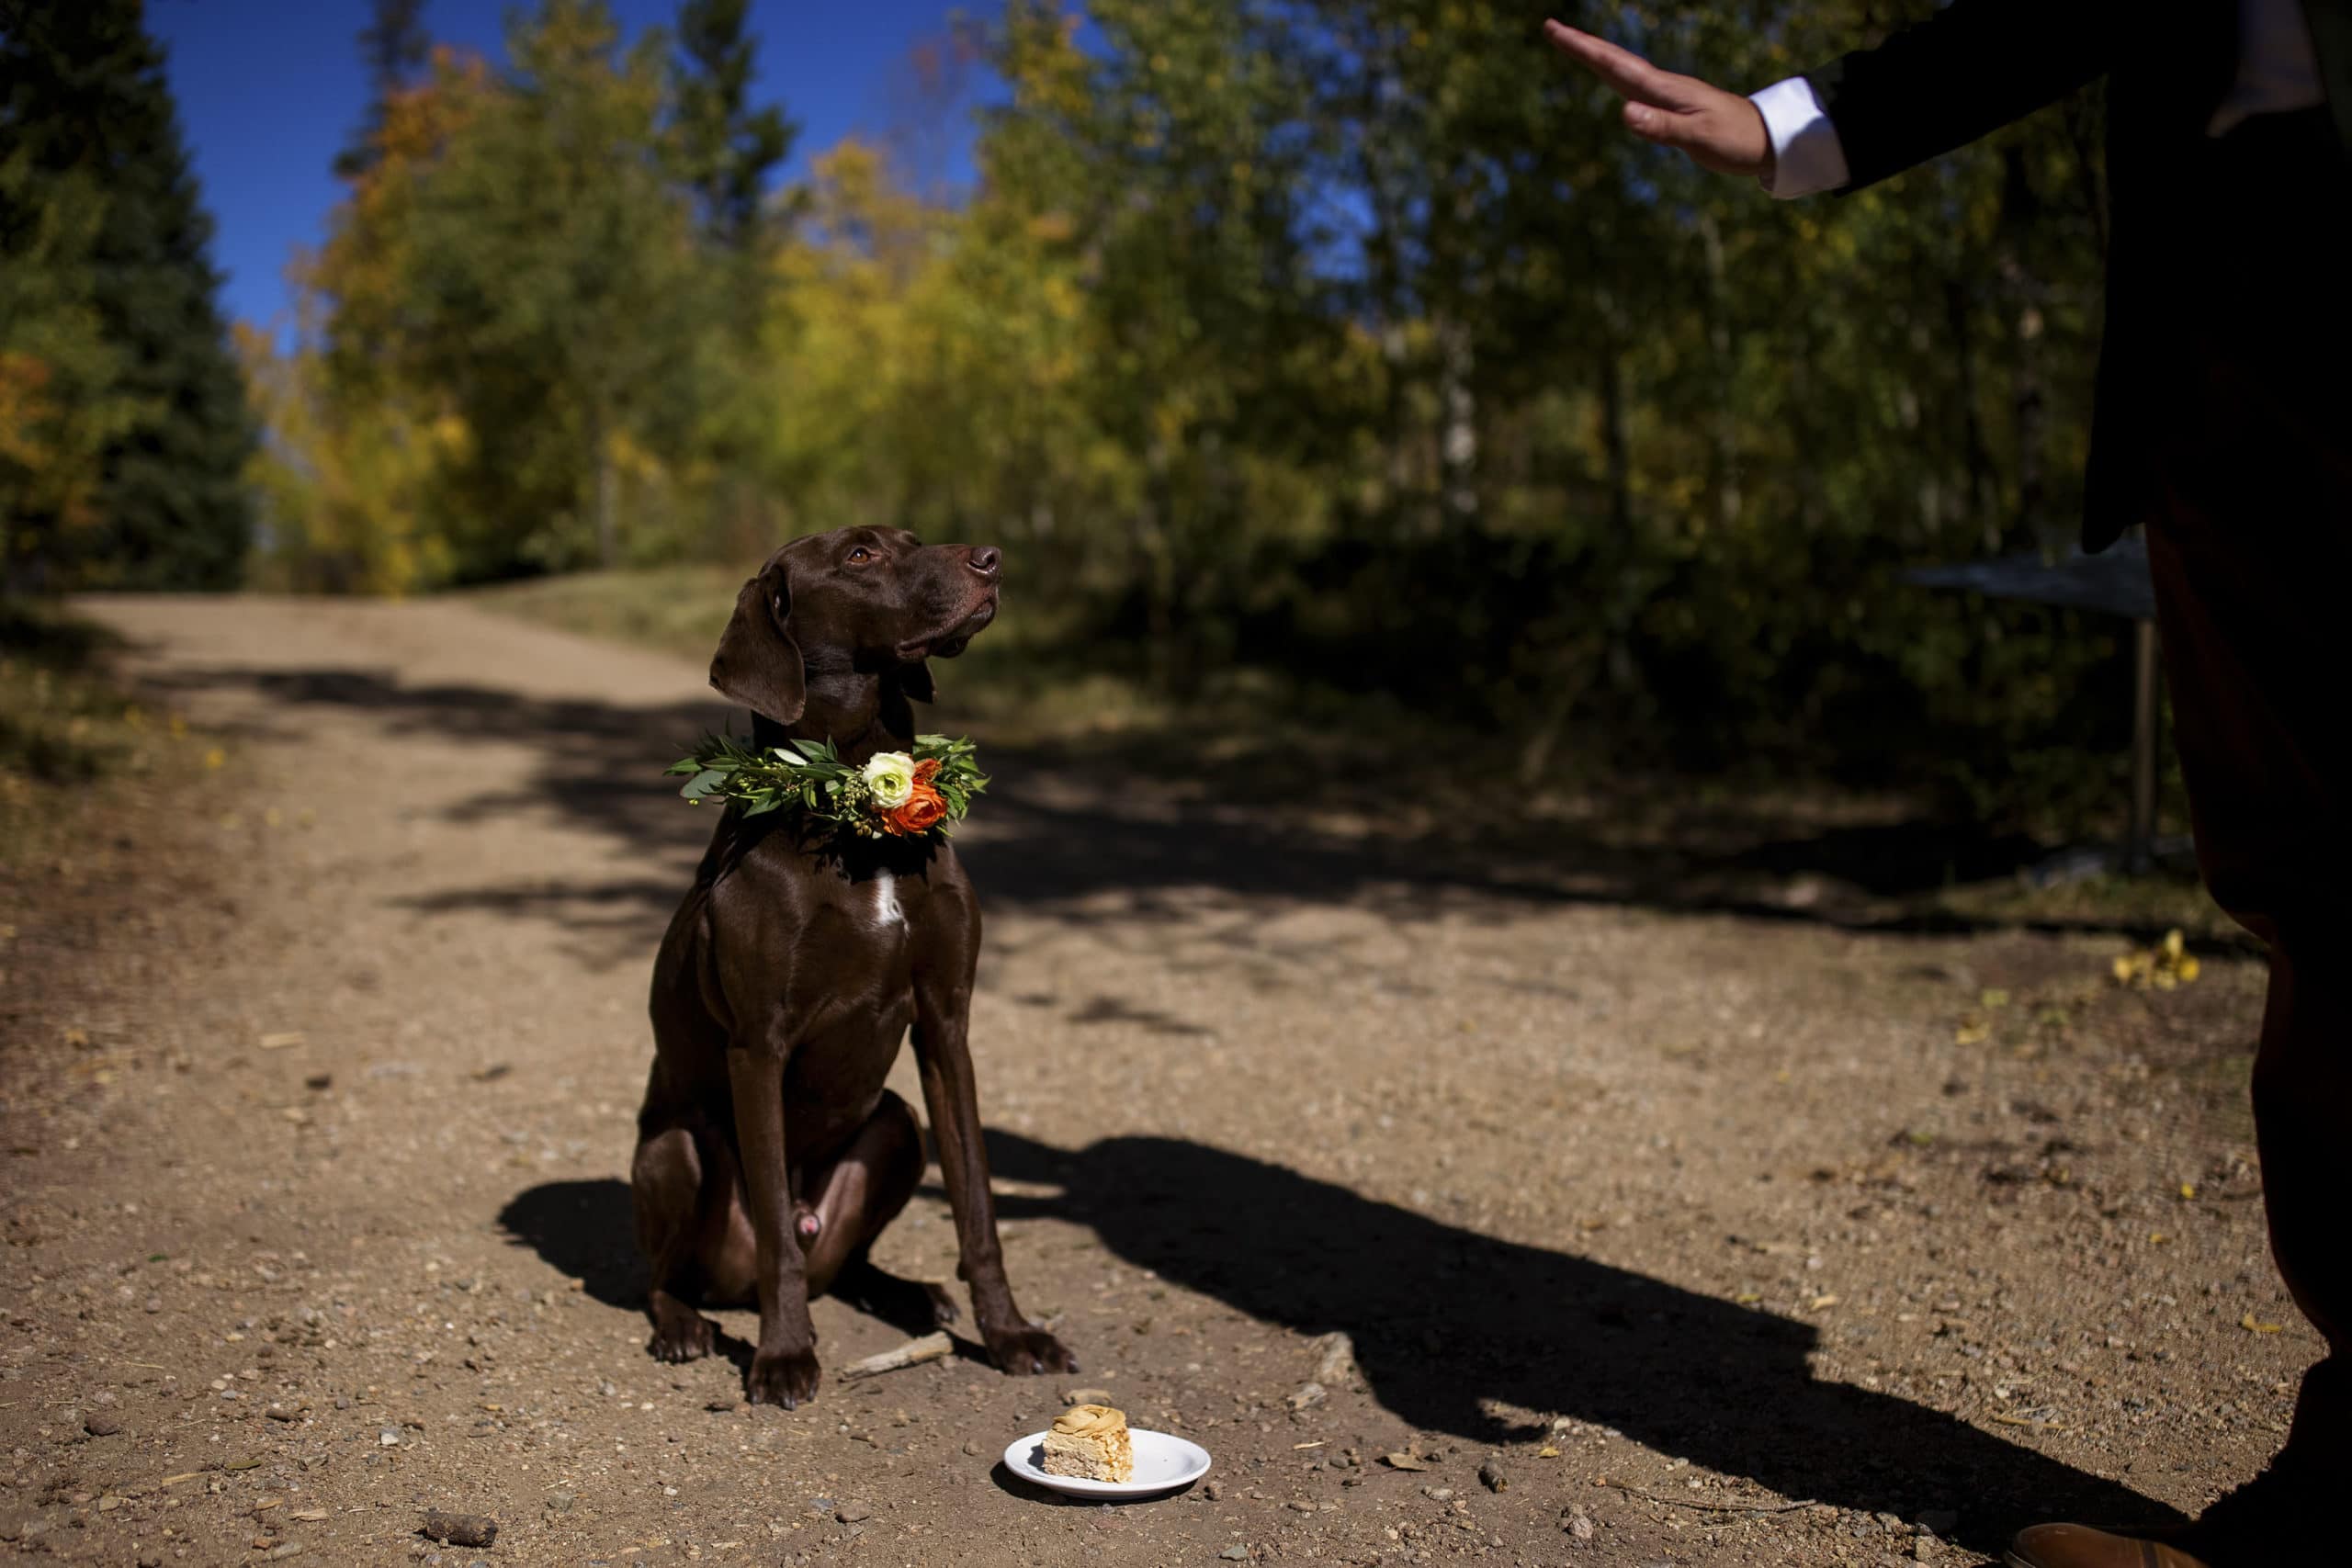 The newlyweds' dog, Norman, is signaled to wait for his special wedding treat